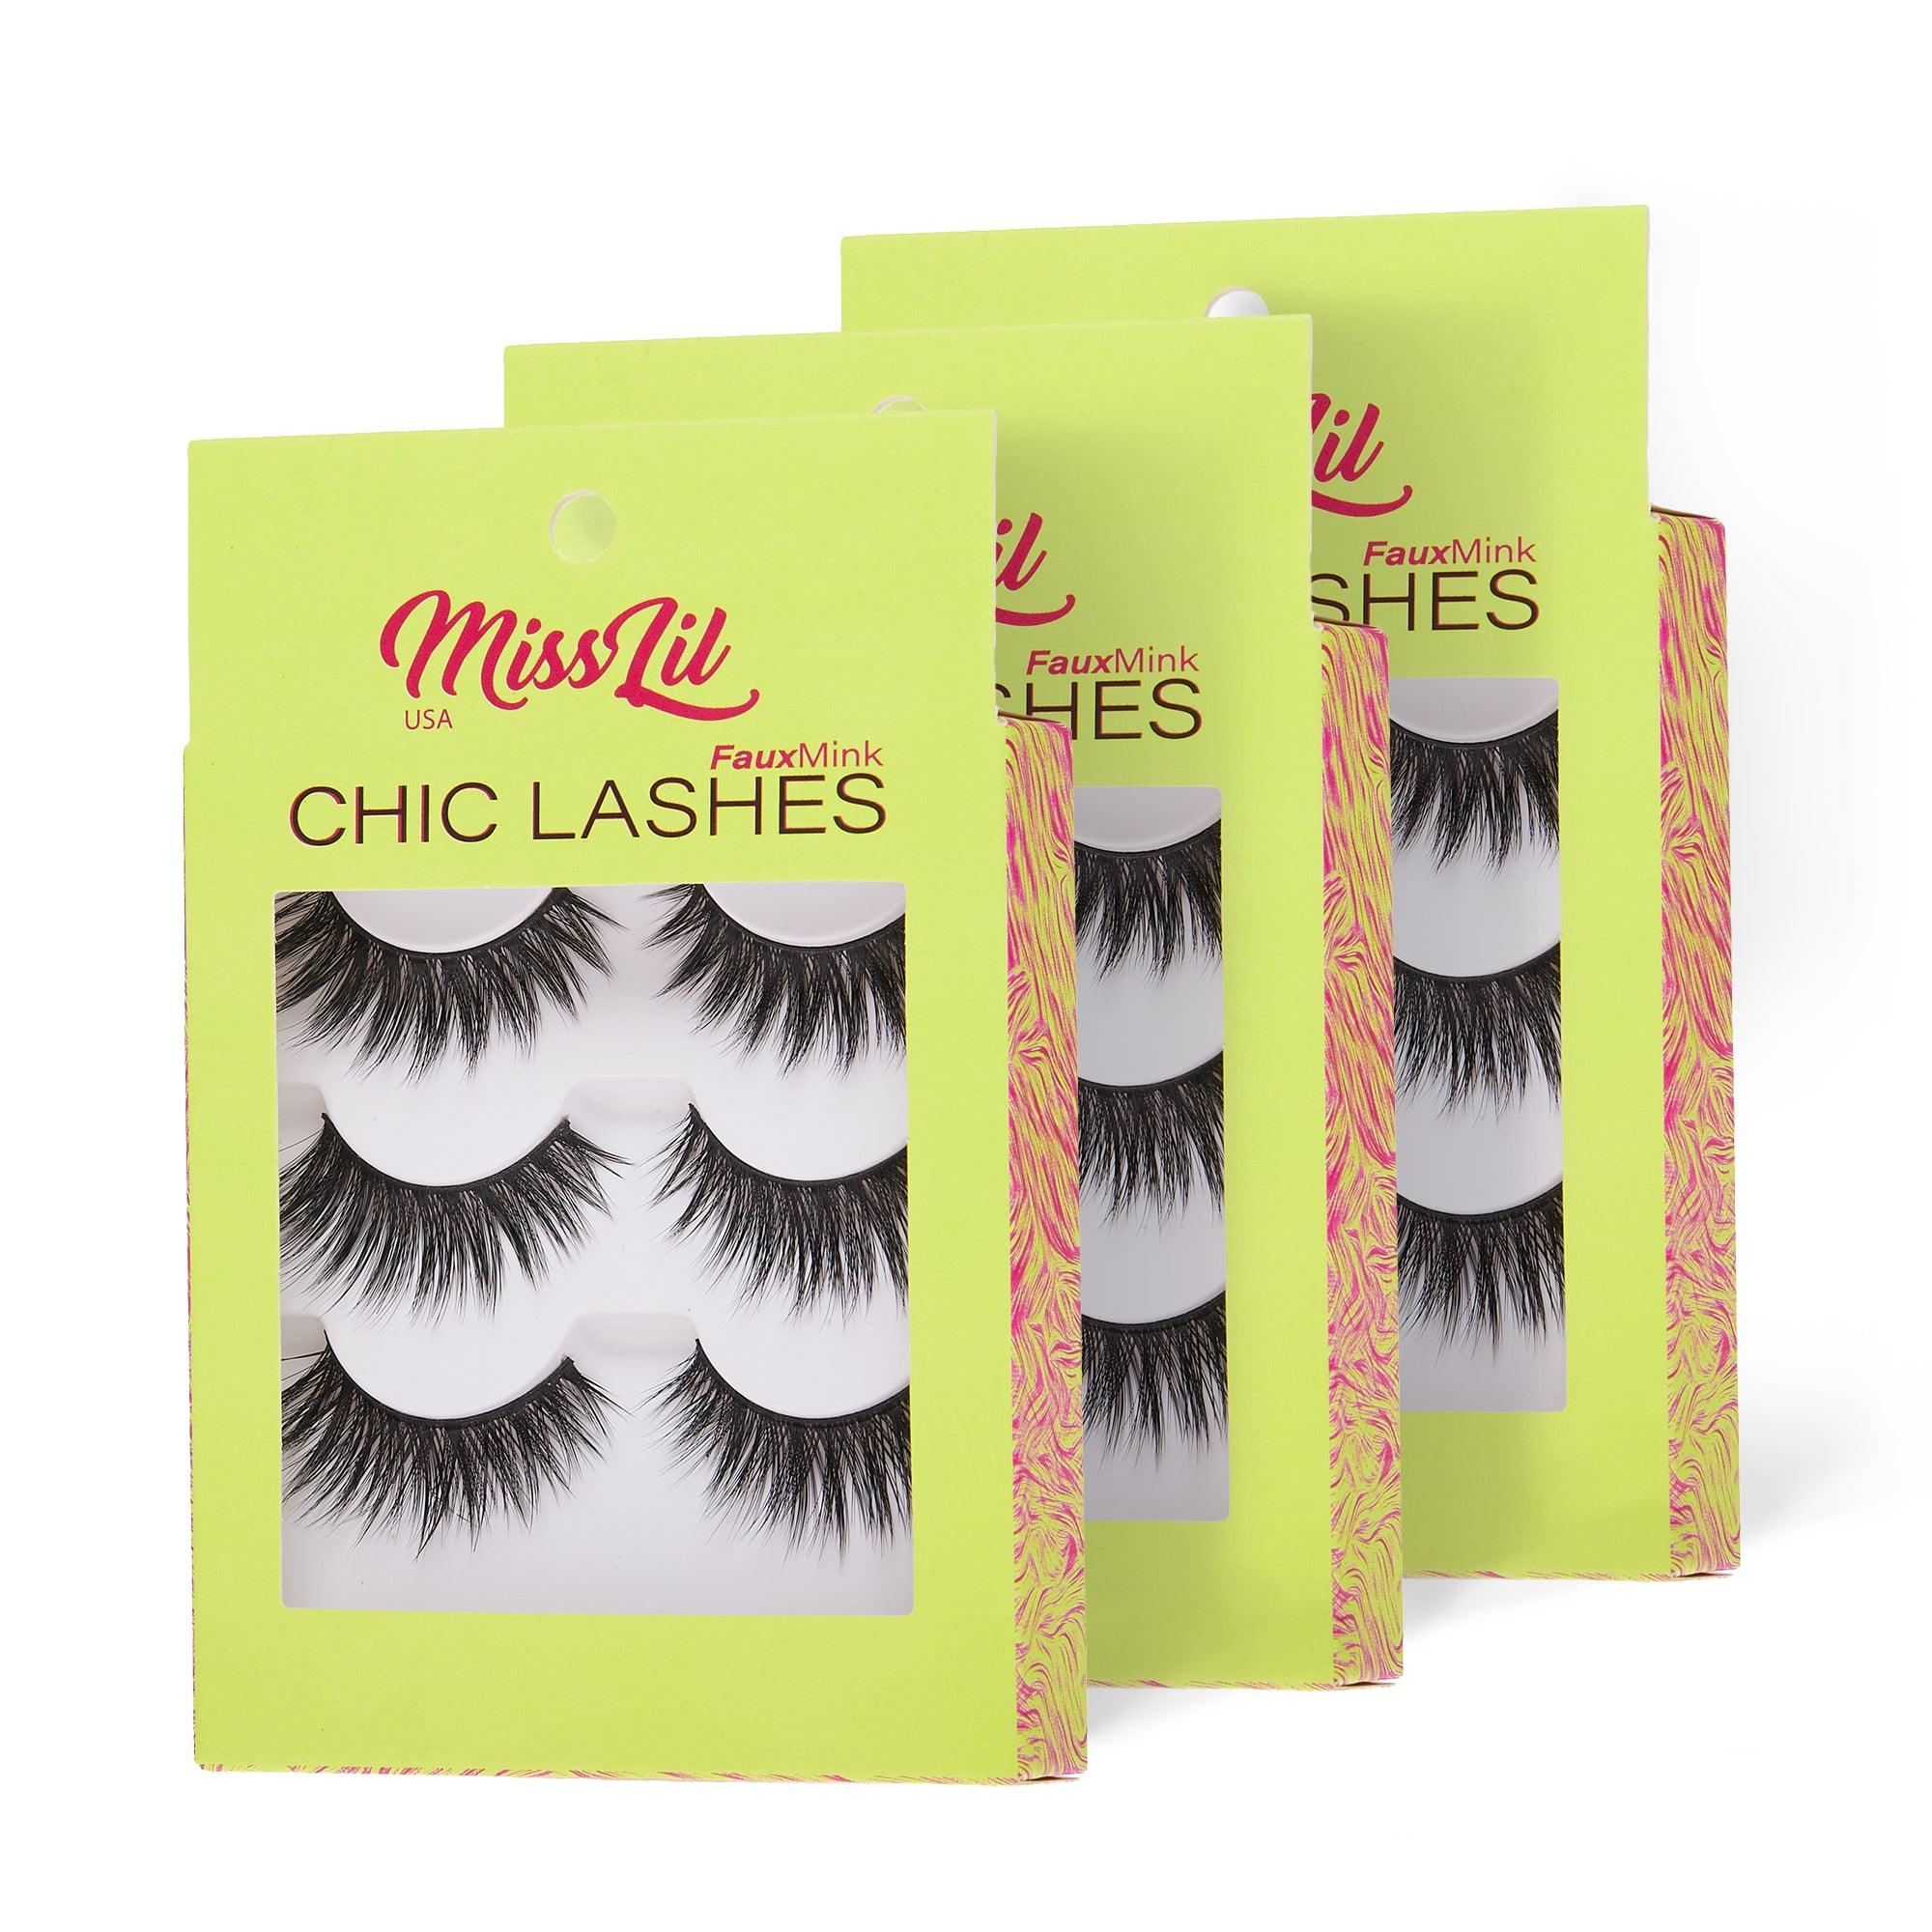 3-Pair Faux Mink Eyelashes - Chic Lashes Collection #12 - Pack of 3 - Miss Lil USA